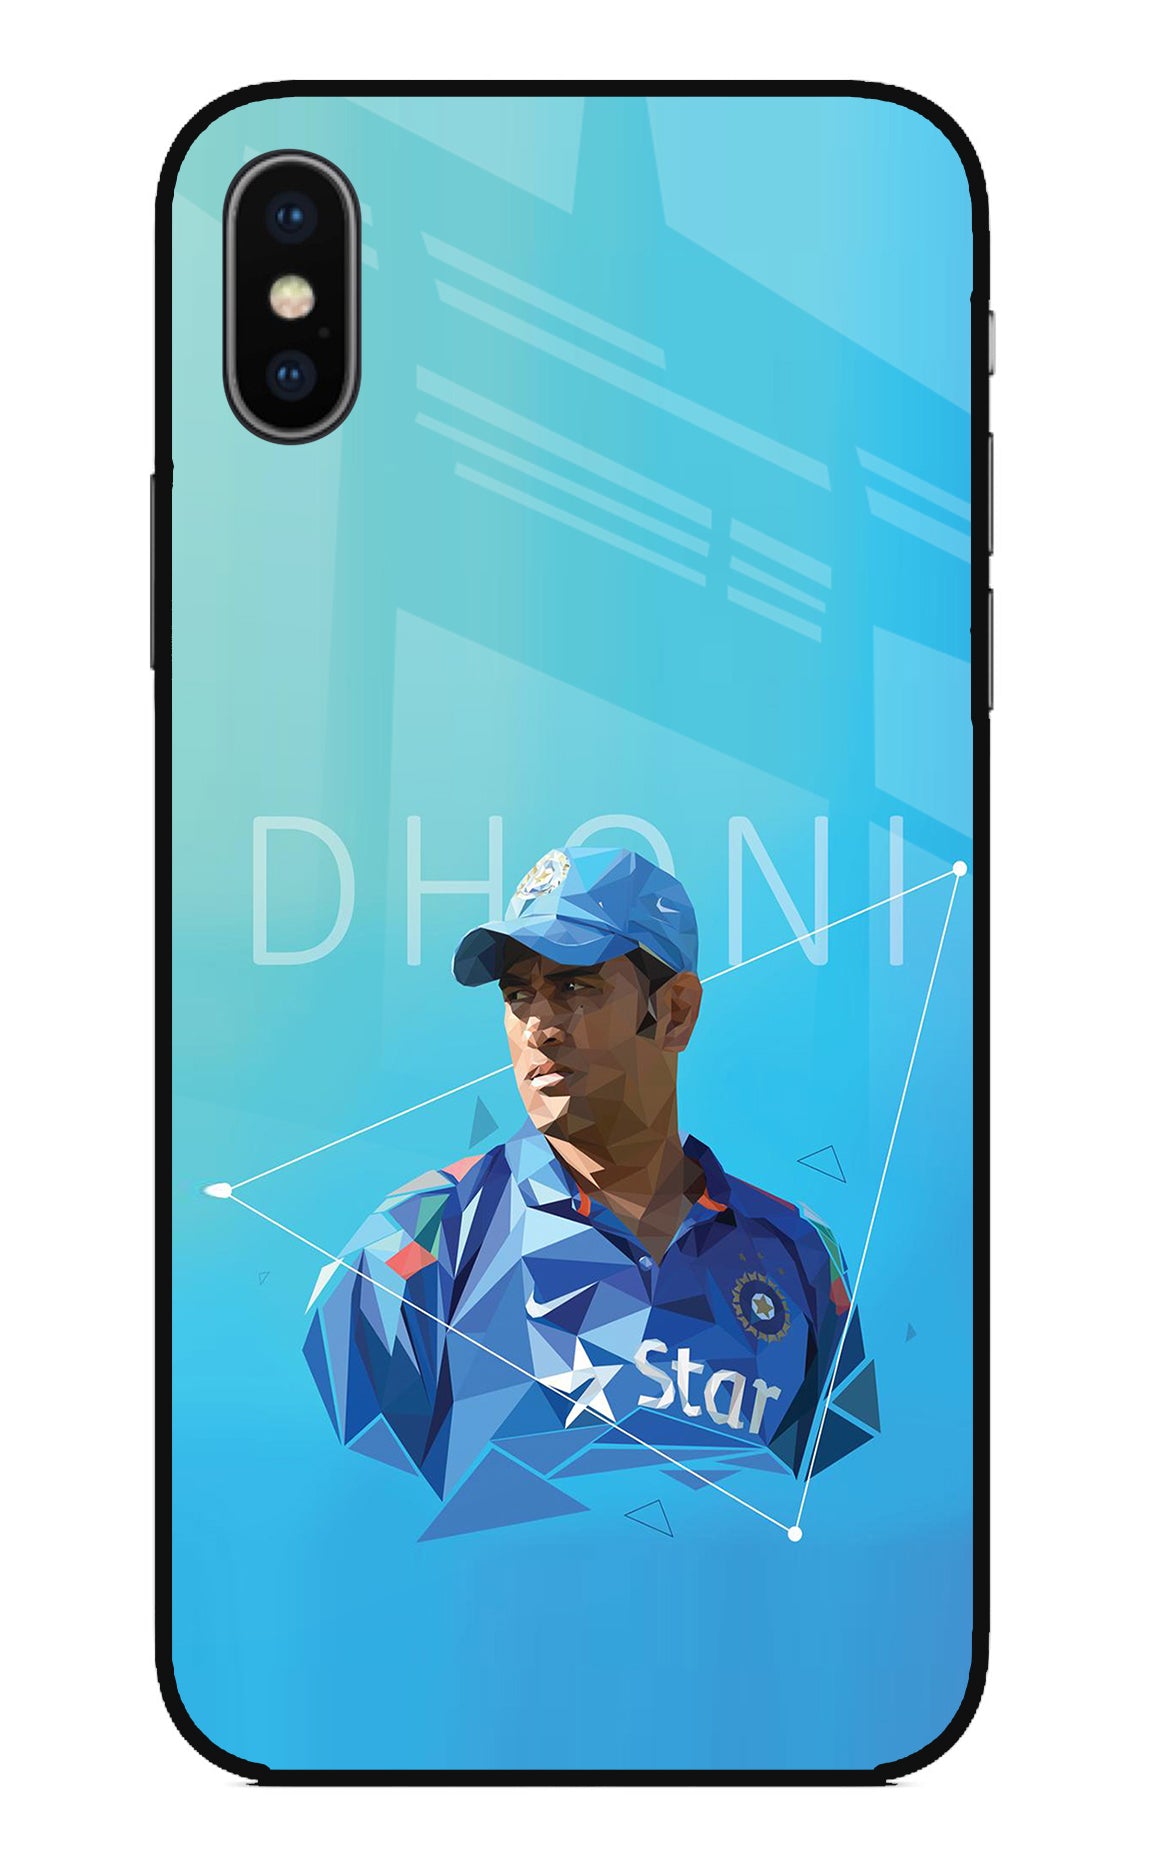 Dhoni Artwork iPhone X Back Cover